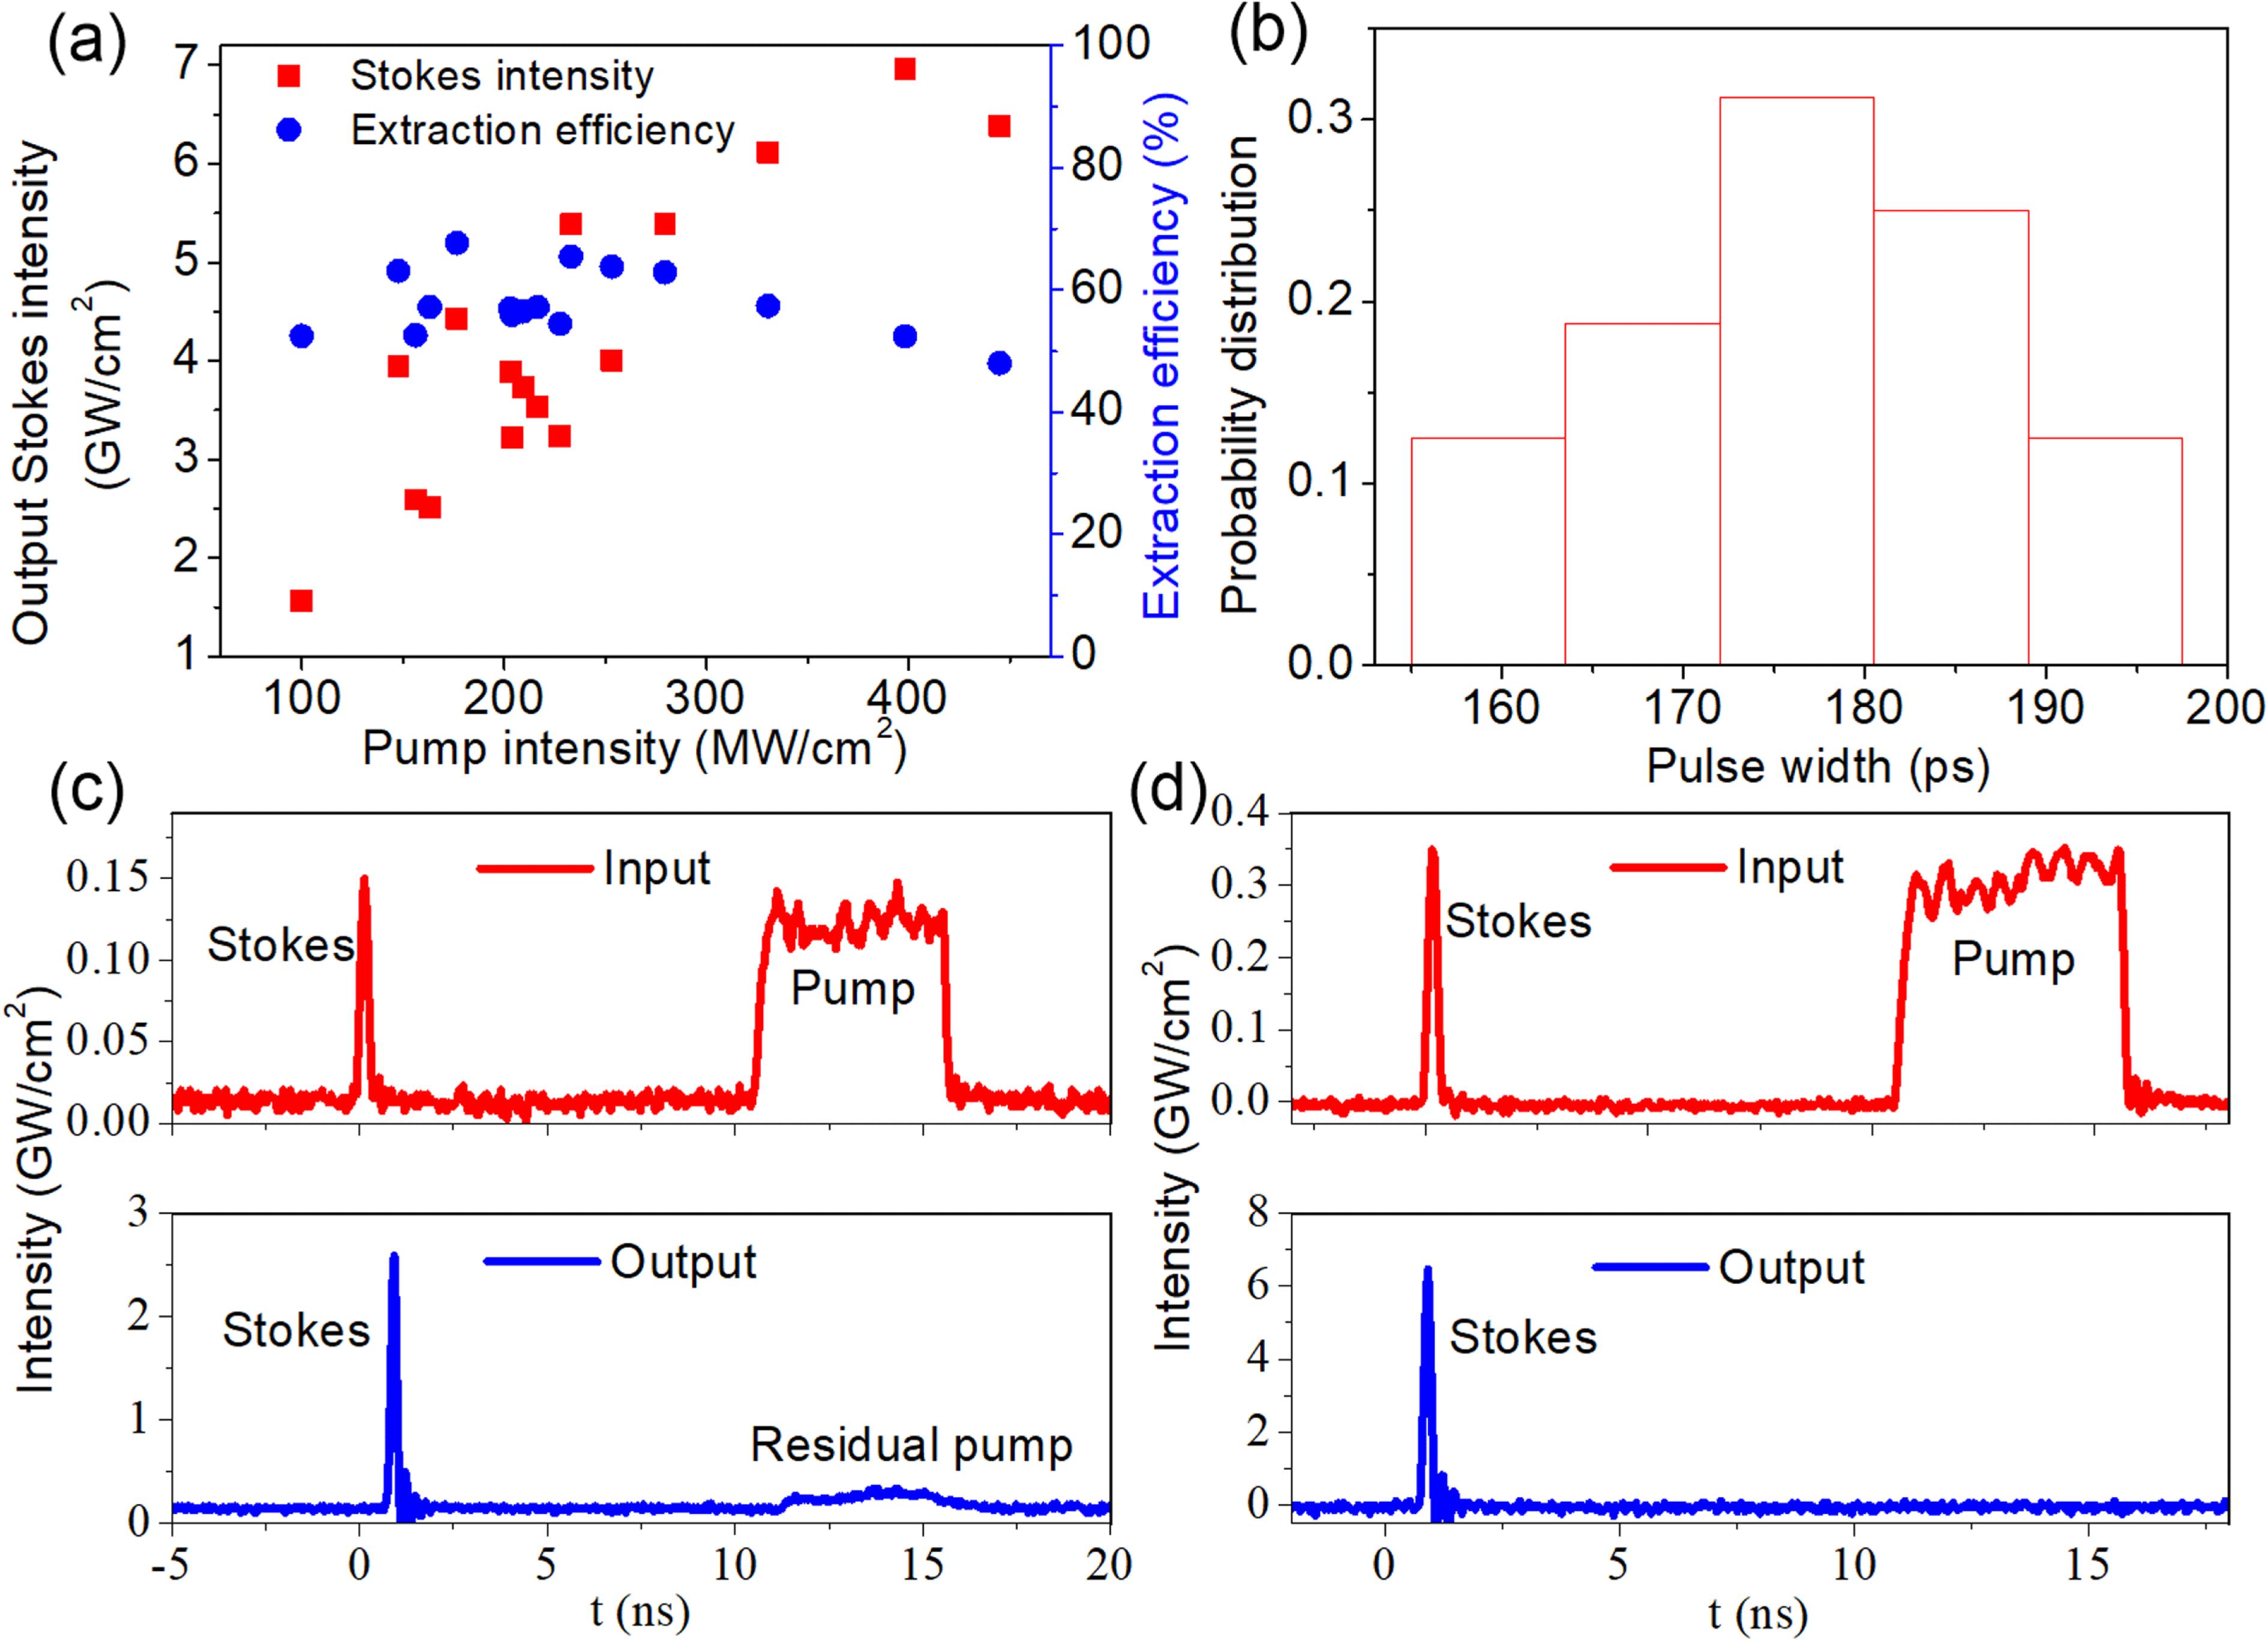 Experimental results. (a) Output Stokes intensity varies with the input intensity; input Stokes and pump intensities are the same. (b) Probability distribution of the output pulse width when the output Stokes pulse widths are in the range 150–200 ps. (c) Temporal intensities of the Stokes and pump pulses for input pump intensity of $150~\text{MW}/\text{cm}^{2}$. The output Stokes pulse width is 165 ps. The pump is not exhausted. (d) Temporal intensities of SBS amplification results for an input pump intensity of $398~\text{MW}/\text{cm}^{2}$. The output Stokes pulse width is 170 ps. Energy is efficiently transferred from the pump pulse to the Stokes pulse.